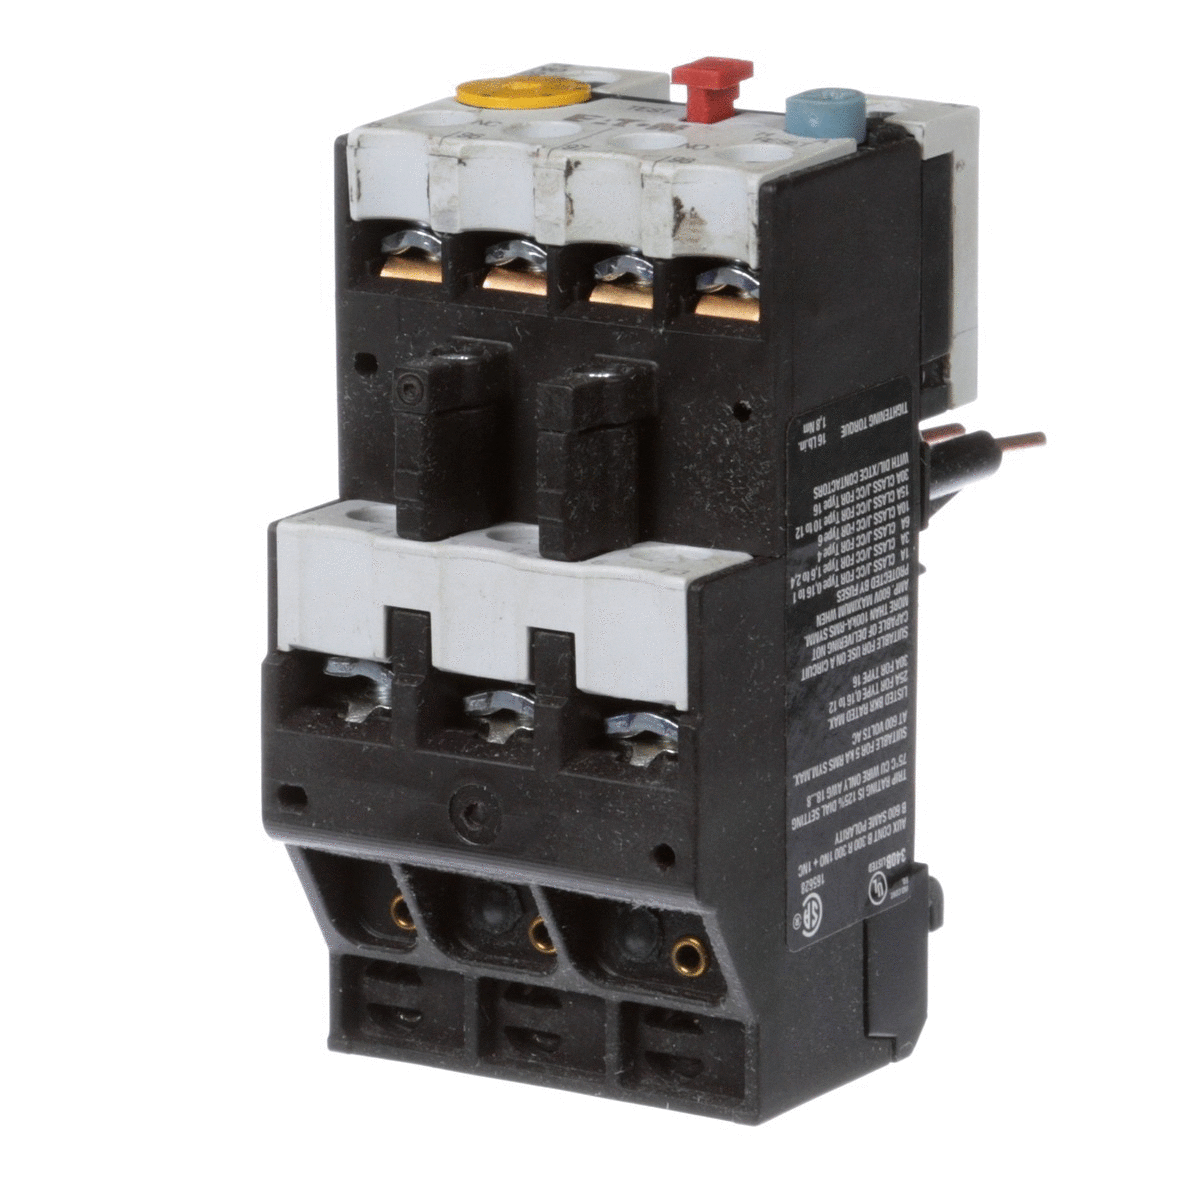 Picture of Blakeslee 71600 2.5-4A Genuine OEM Overload Relay Range